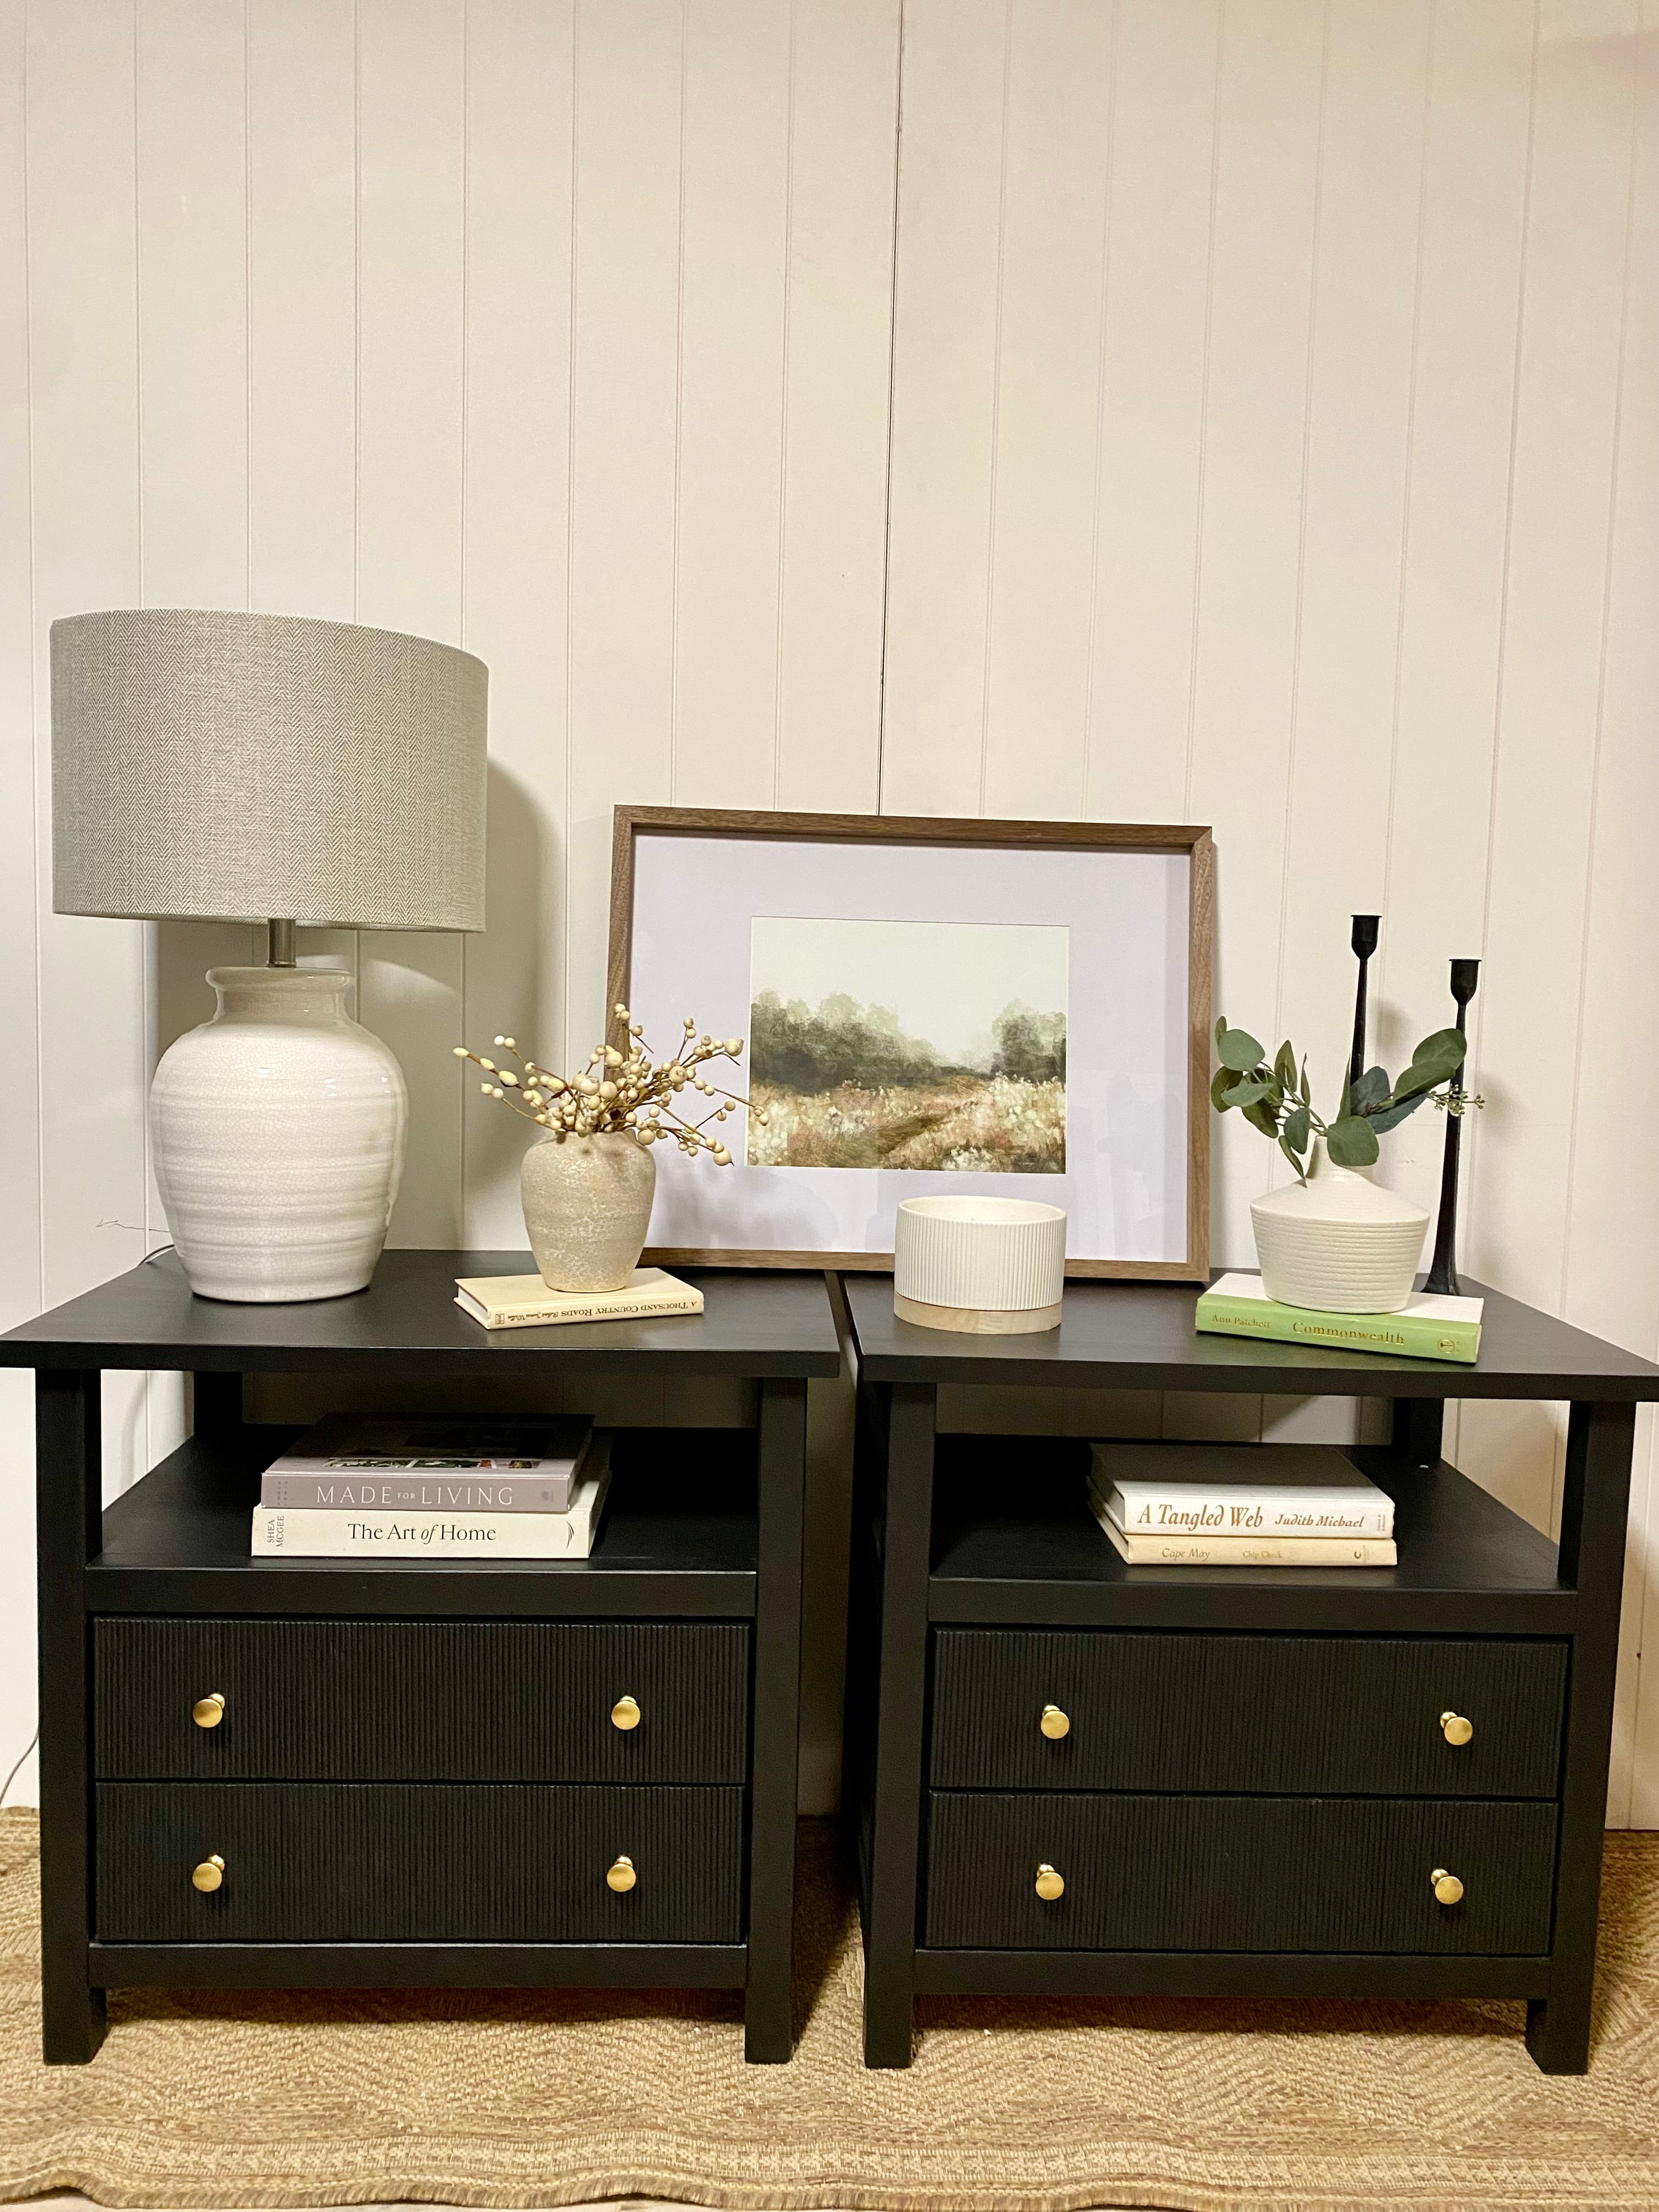 Gorgeous PAIR Black Refinished Nightstands with fluted detail on drawers